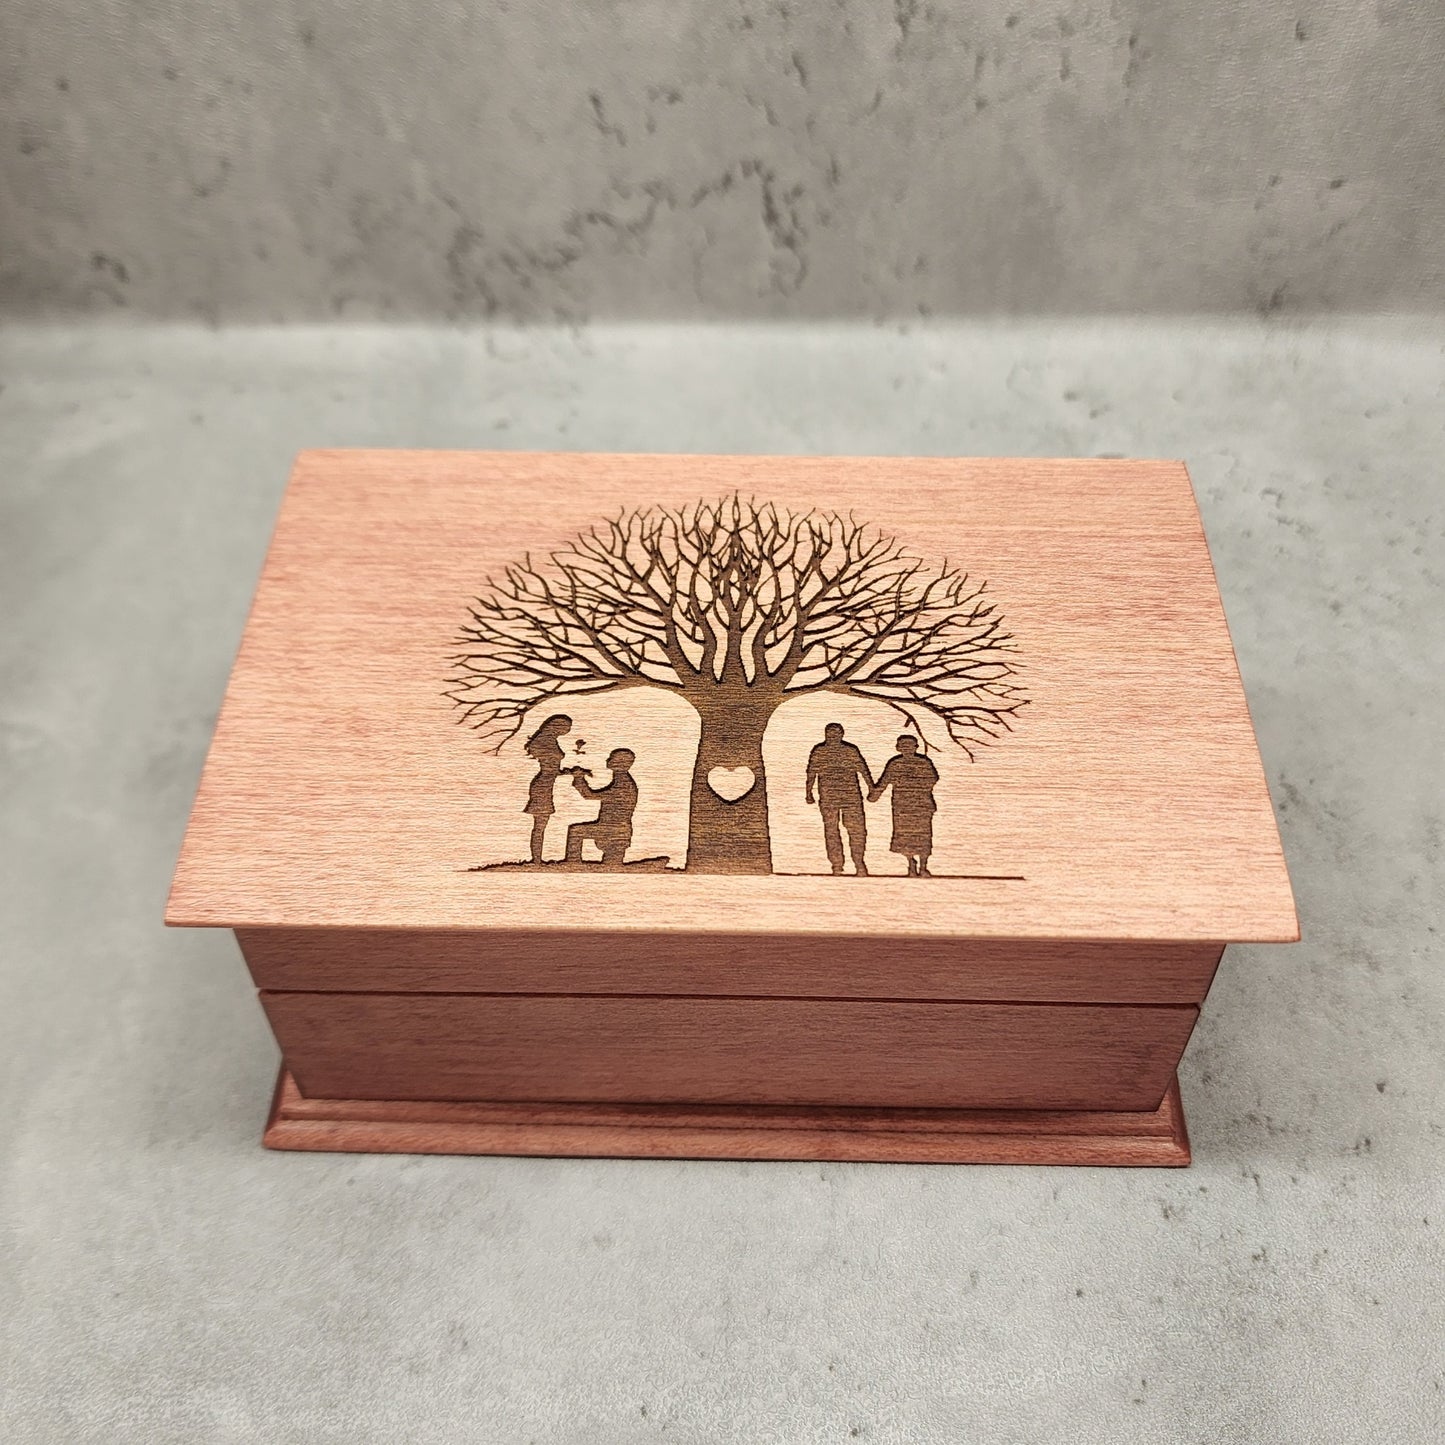 Wooden Music Jewelry Box, Special Gifts